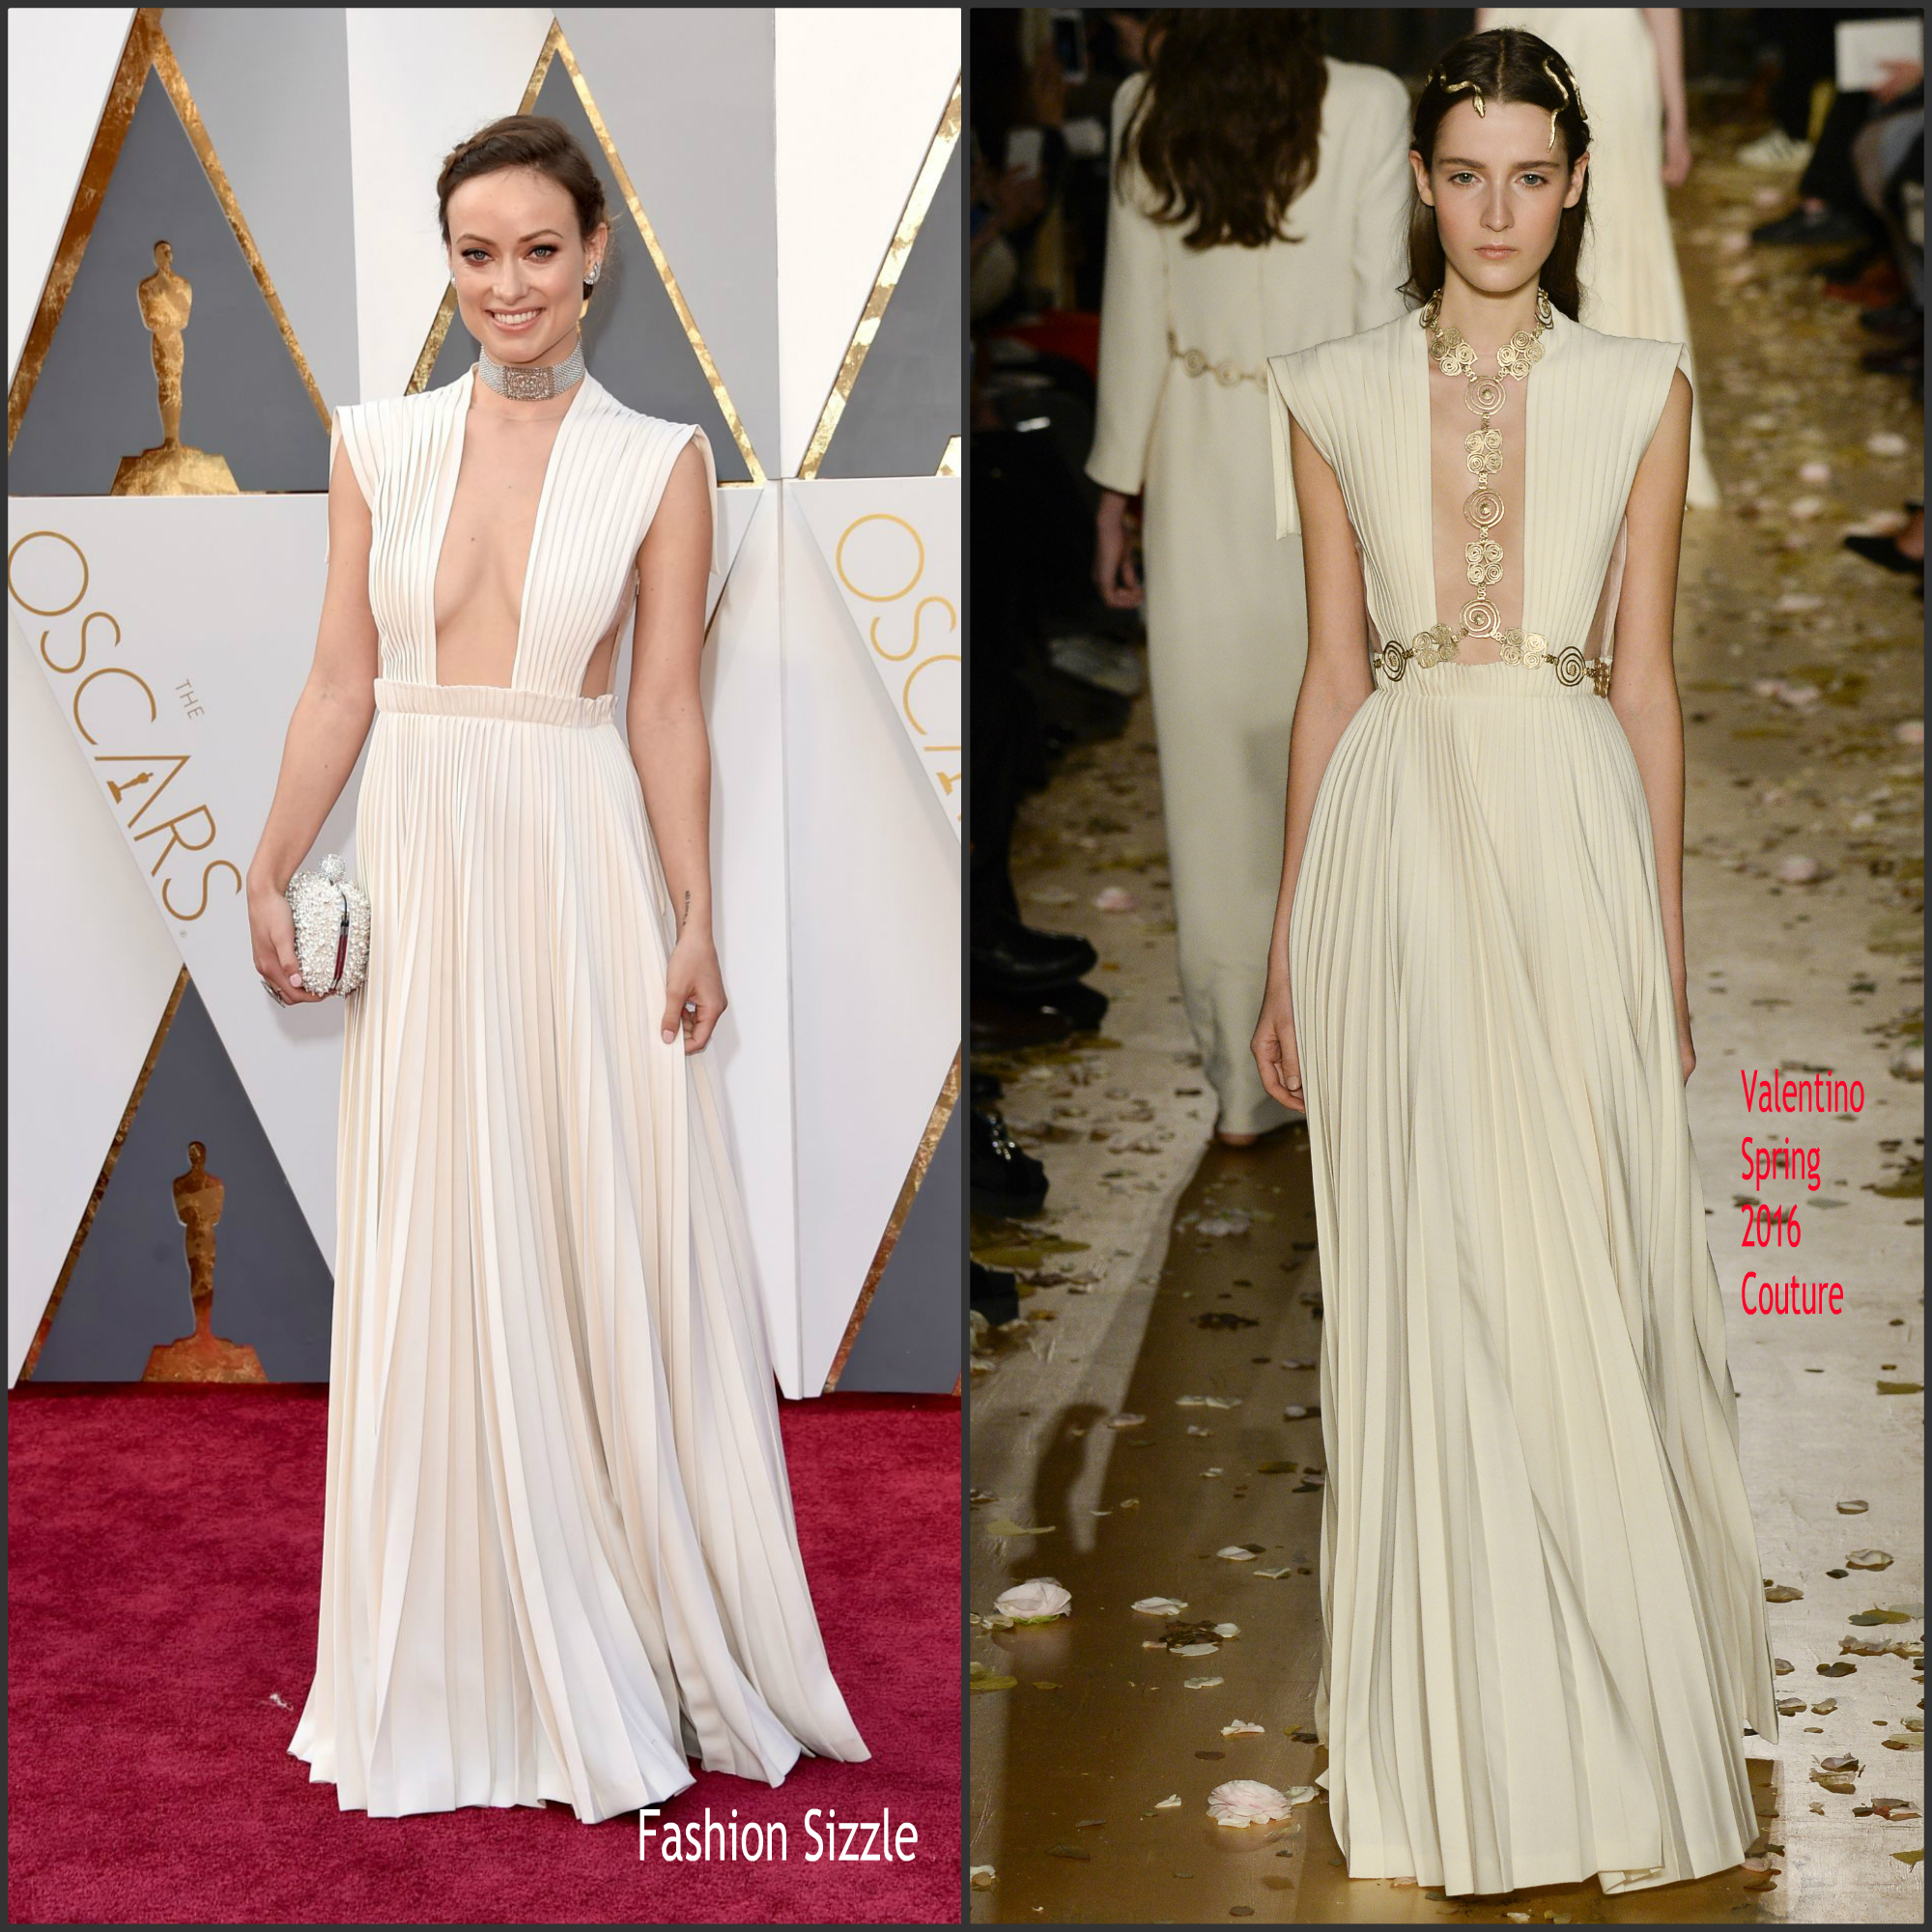 olivia-wilde-in-valentino-couture-Oscars-2016-in-hollywood